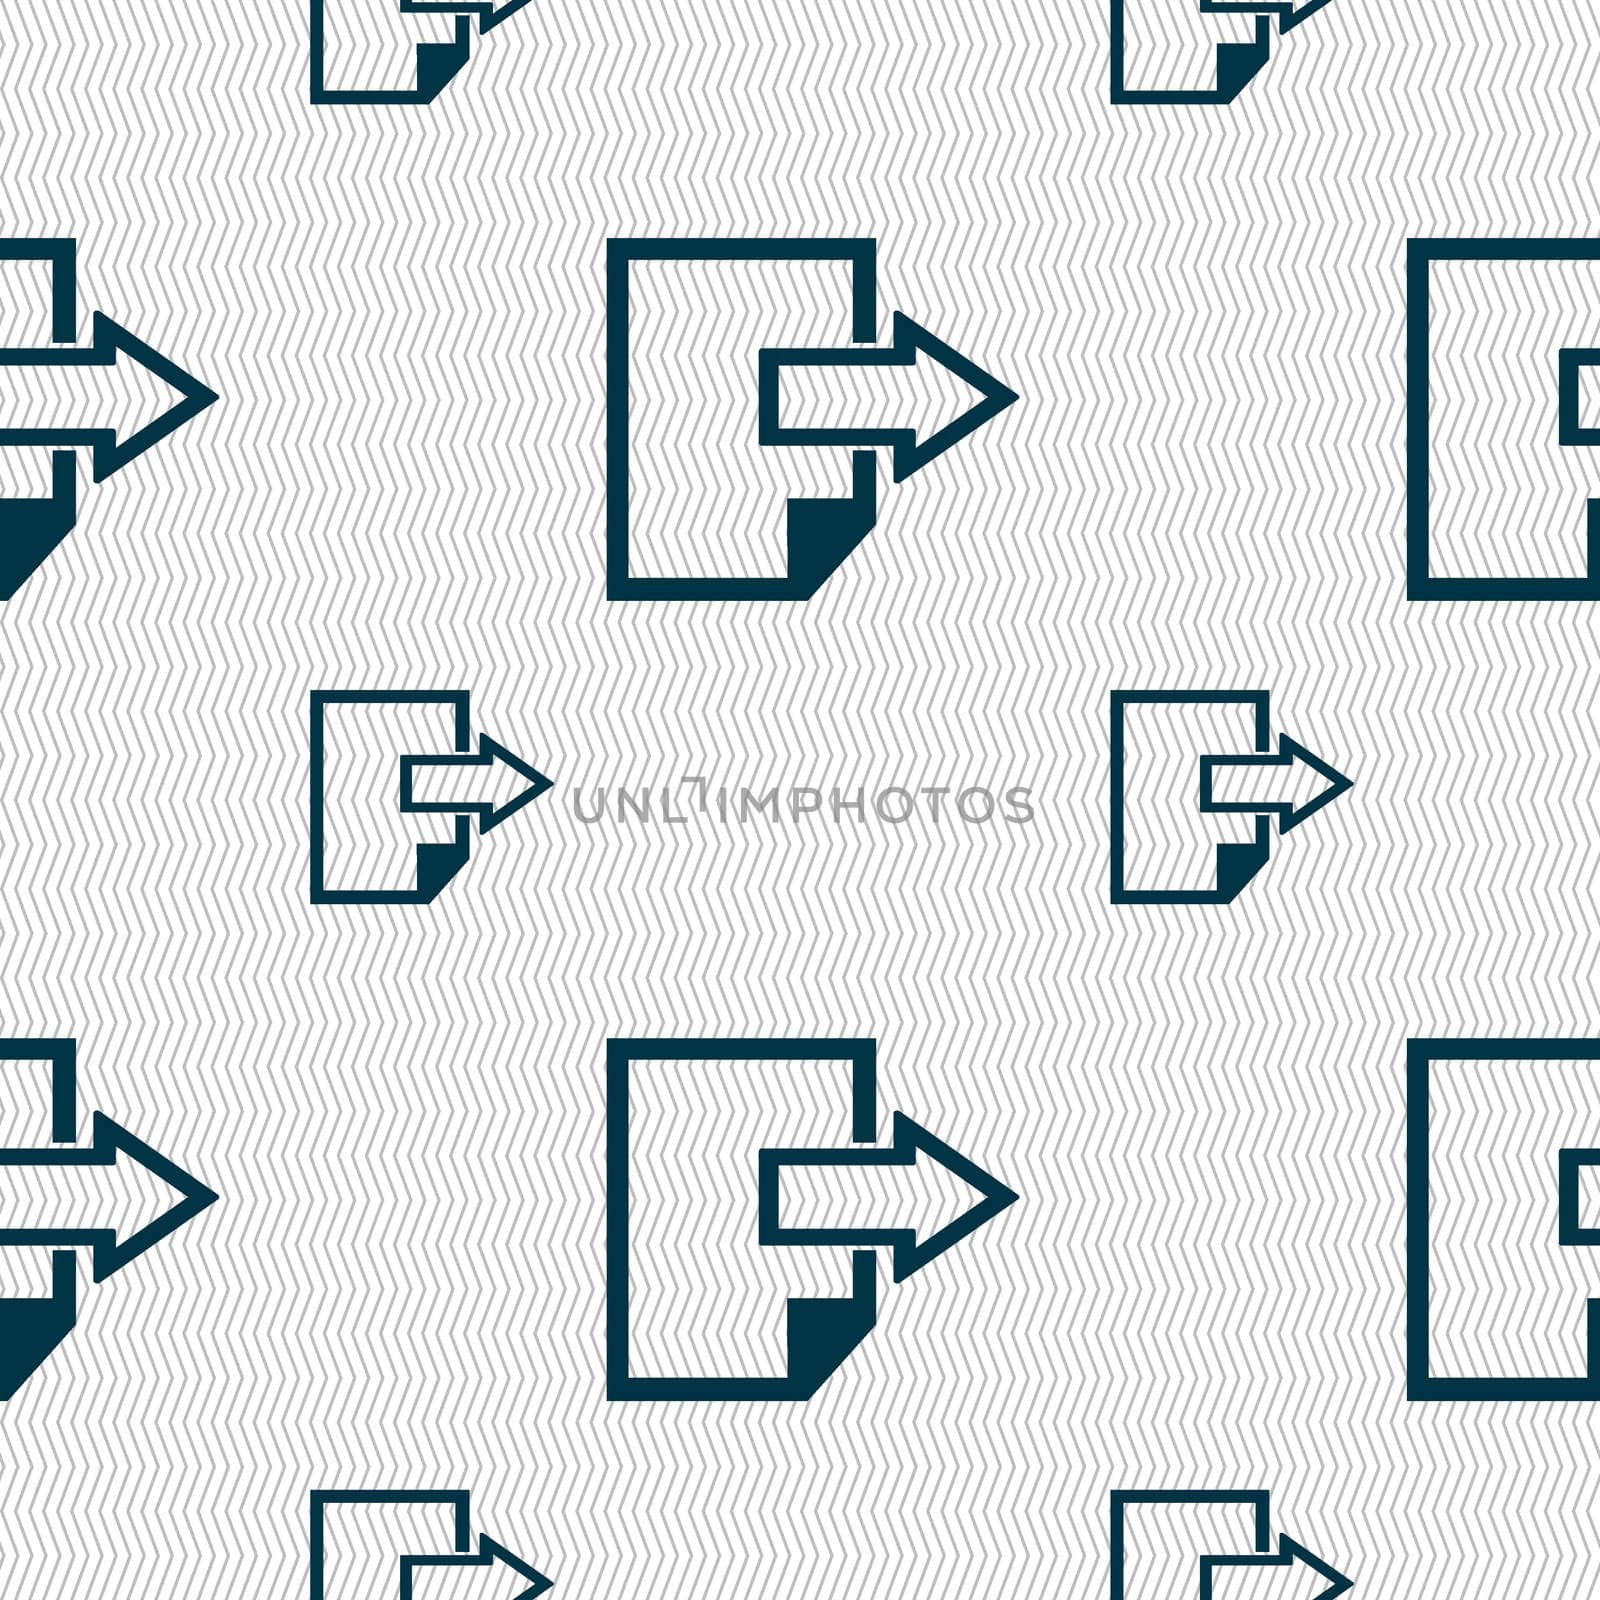 Export file icon. File document symbol. Seamless pattern with geometric texture. illustration